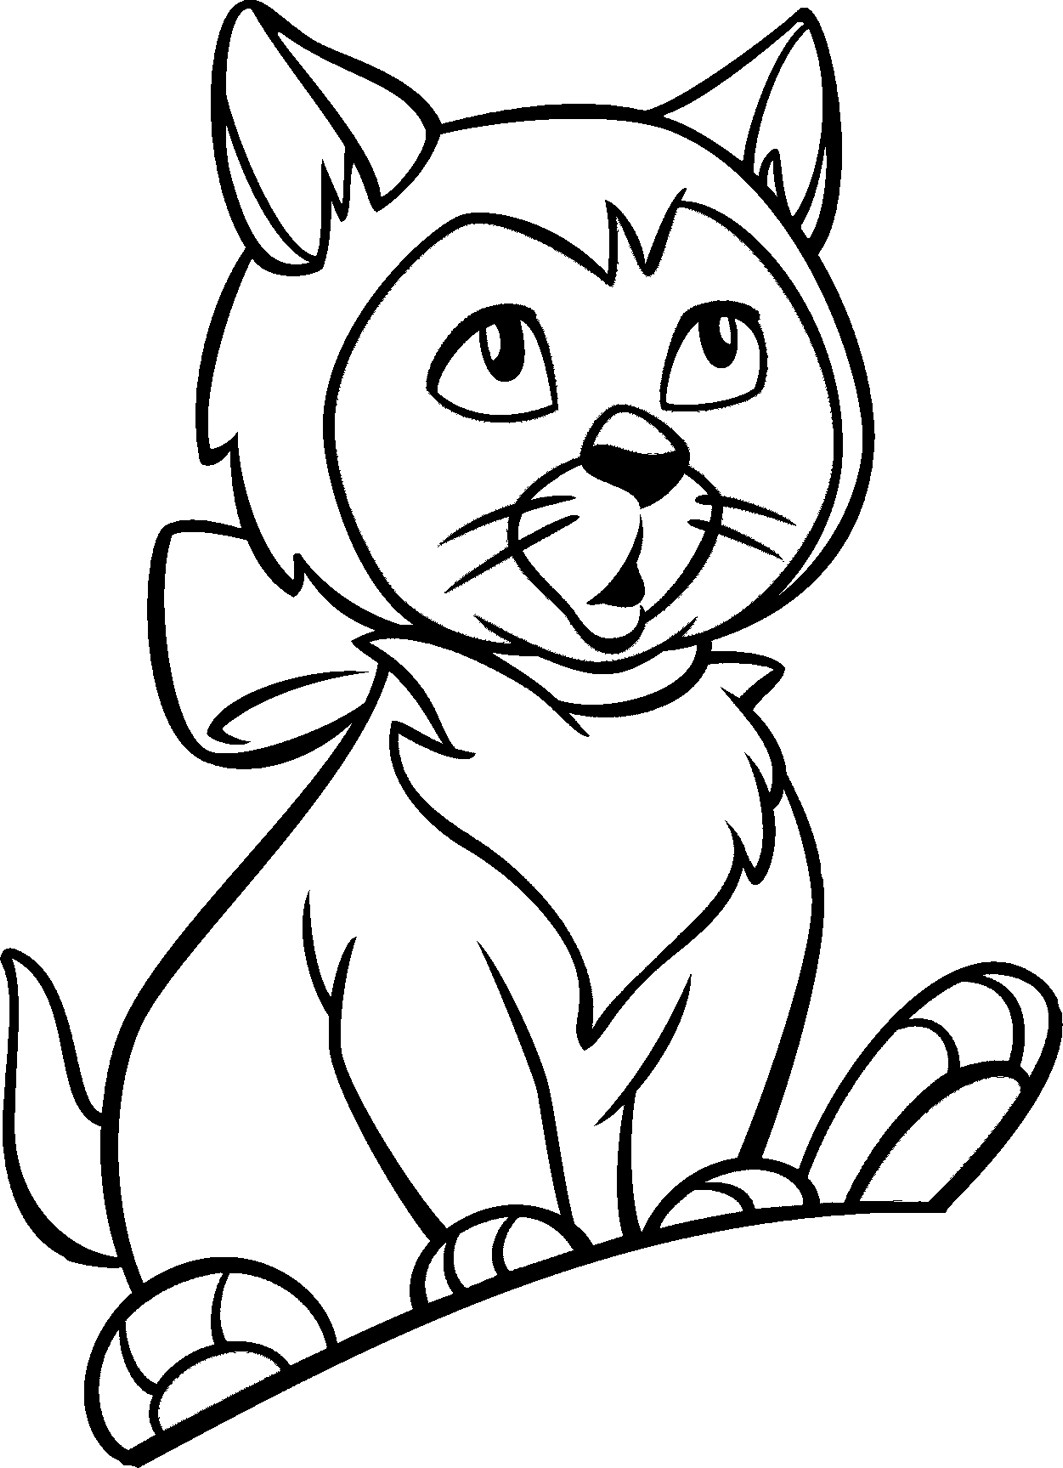 Kids Coloring Sheets
 Coloring Pages for Kids Cat Coloring Pages for Kids